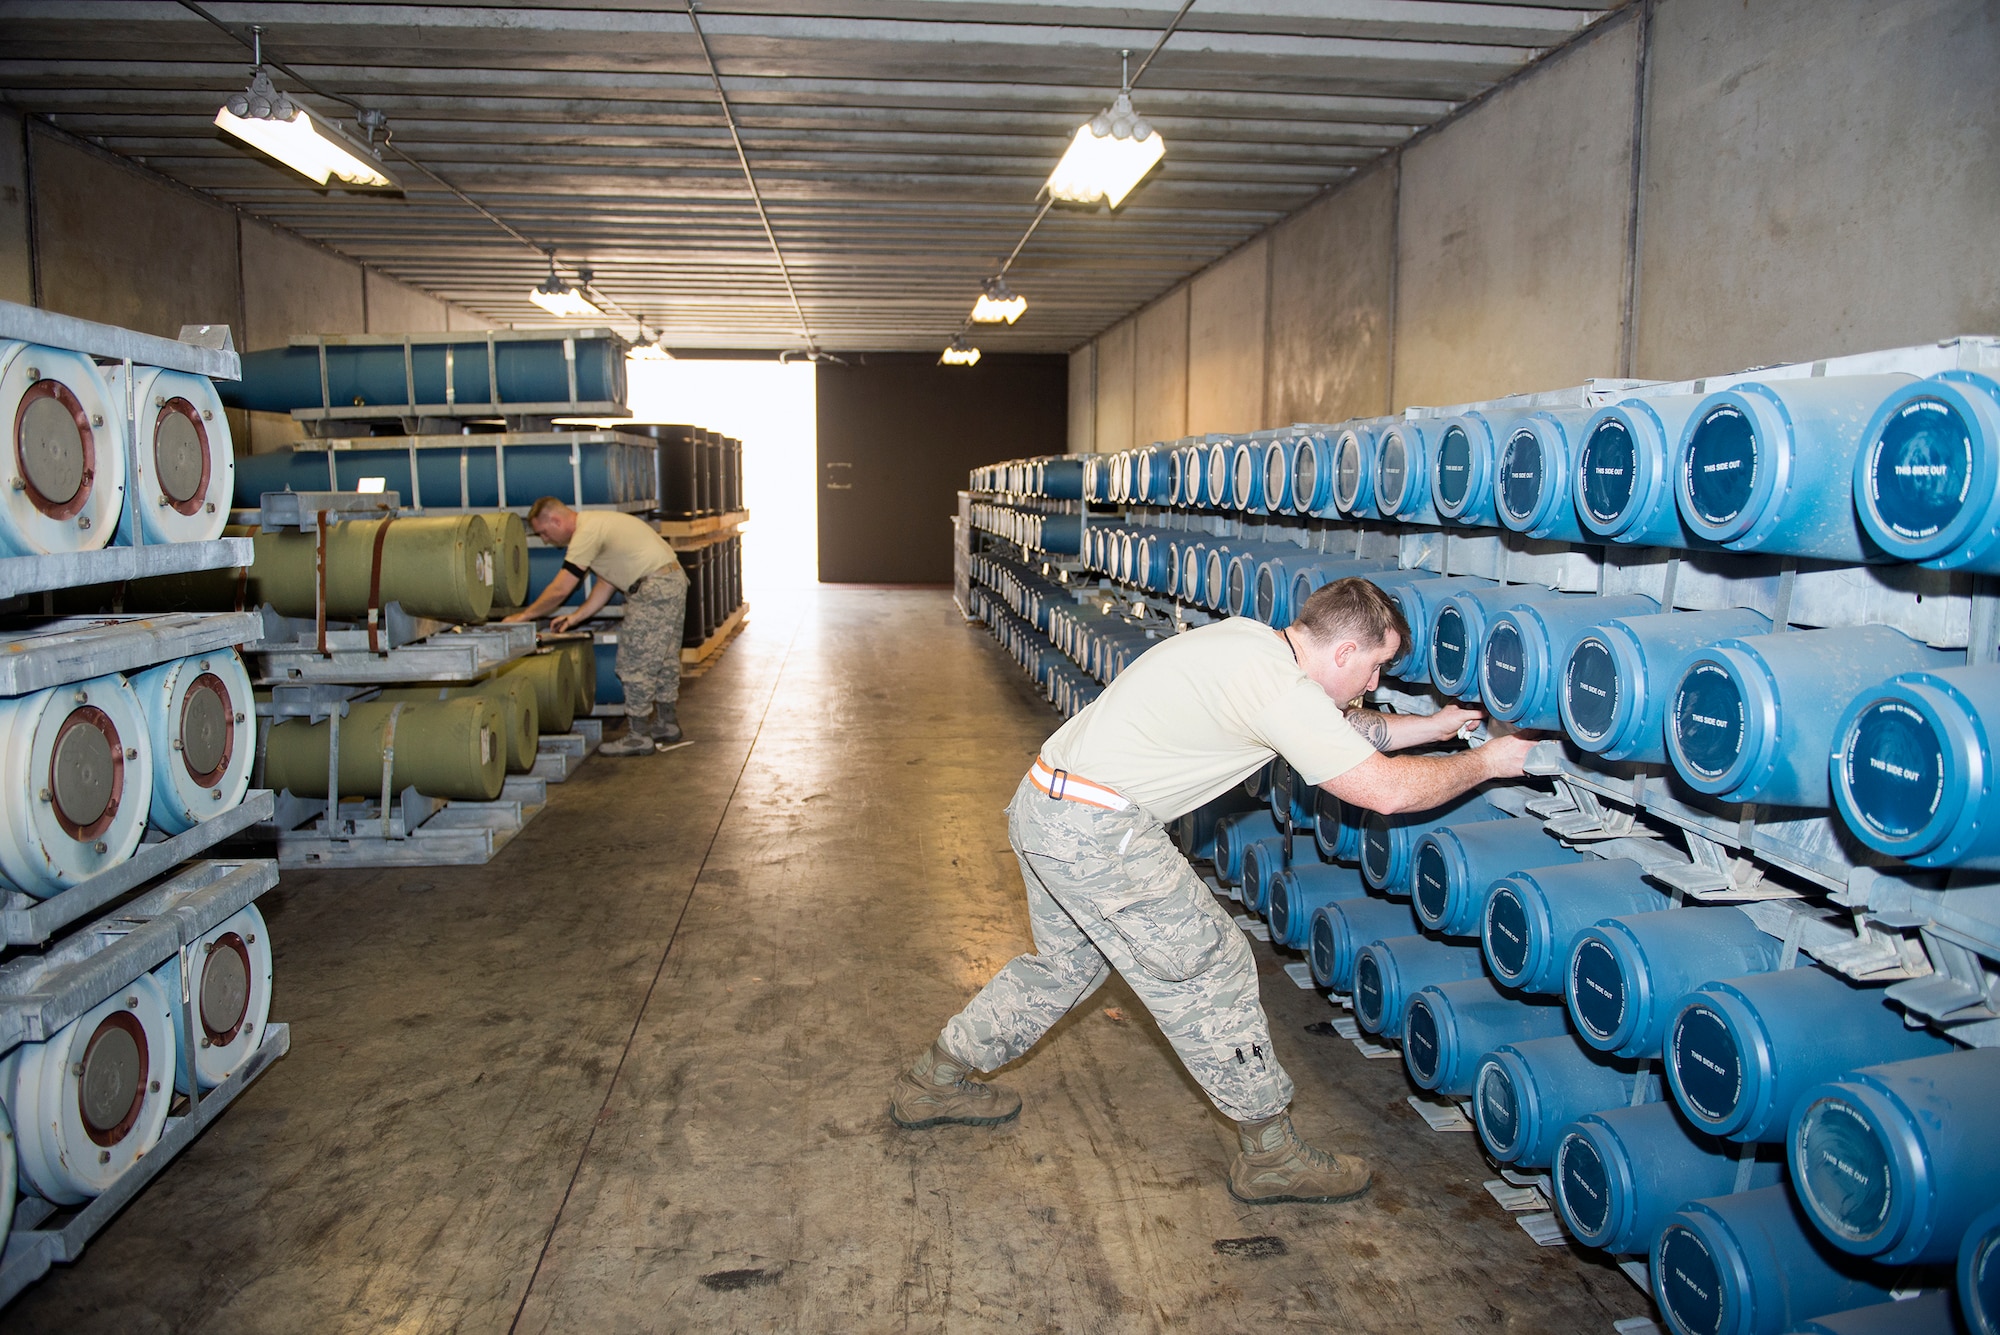 U.S. Air Force Senior Airman John Swinney, 23d Equipment Maintenance Squadron munitions inspector, checks for damage on an M247 rocket warhead during a periodic inspection, Oct. 6, 2015, at Moody Air Force Base, Ga. The munitions flight inspection section averages five to six scheduled inspections per week while additionally monitoring records and supporting emergency situations. (U.S. Air Force photo by Airman 1st Class Greg Nash/Released)